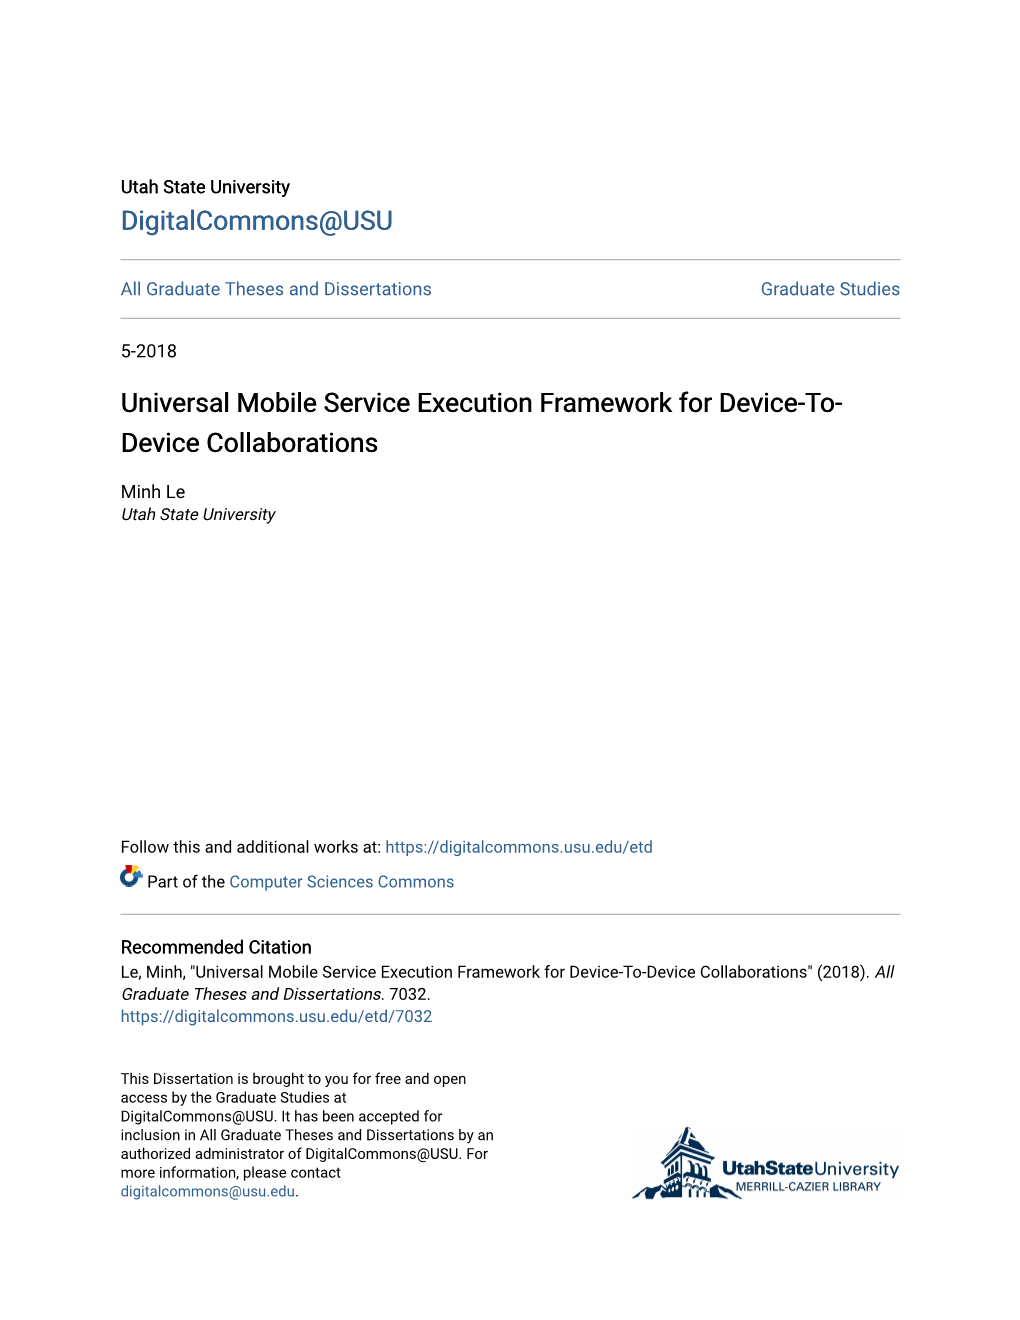 Universal Mobile Service Execution Framework for Device-To-Device Collaborations" (2018)